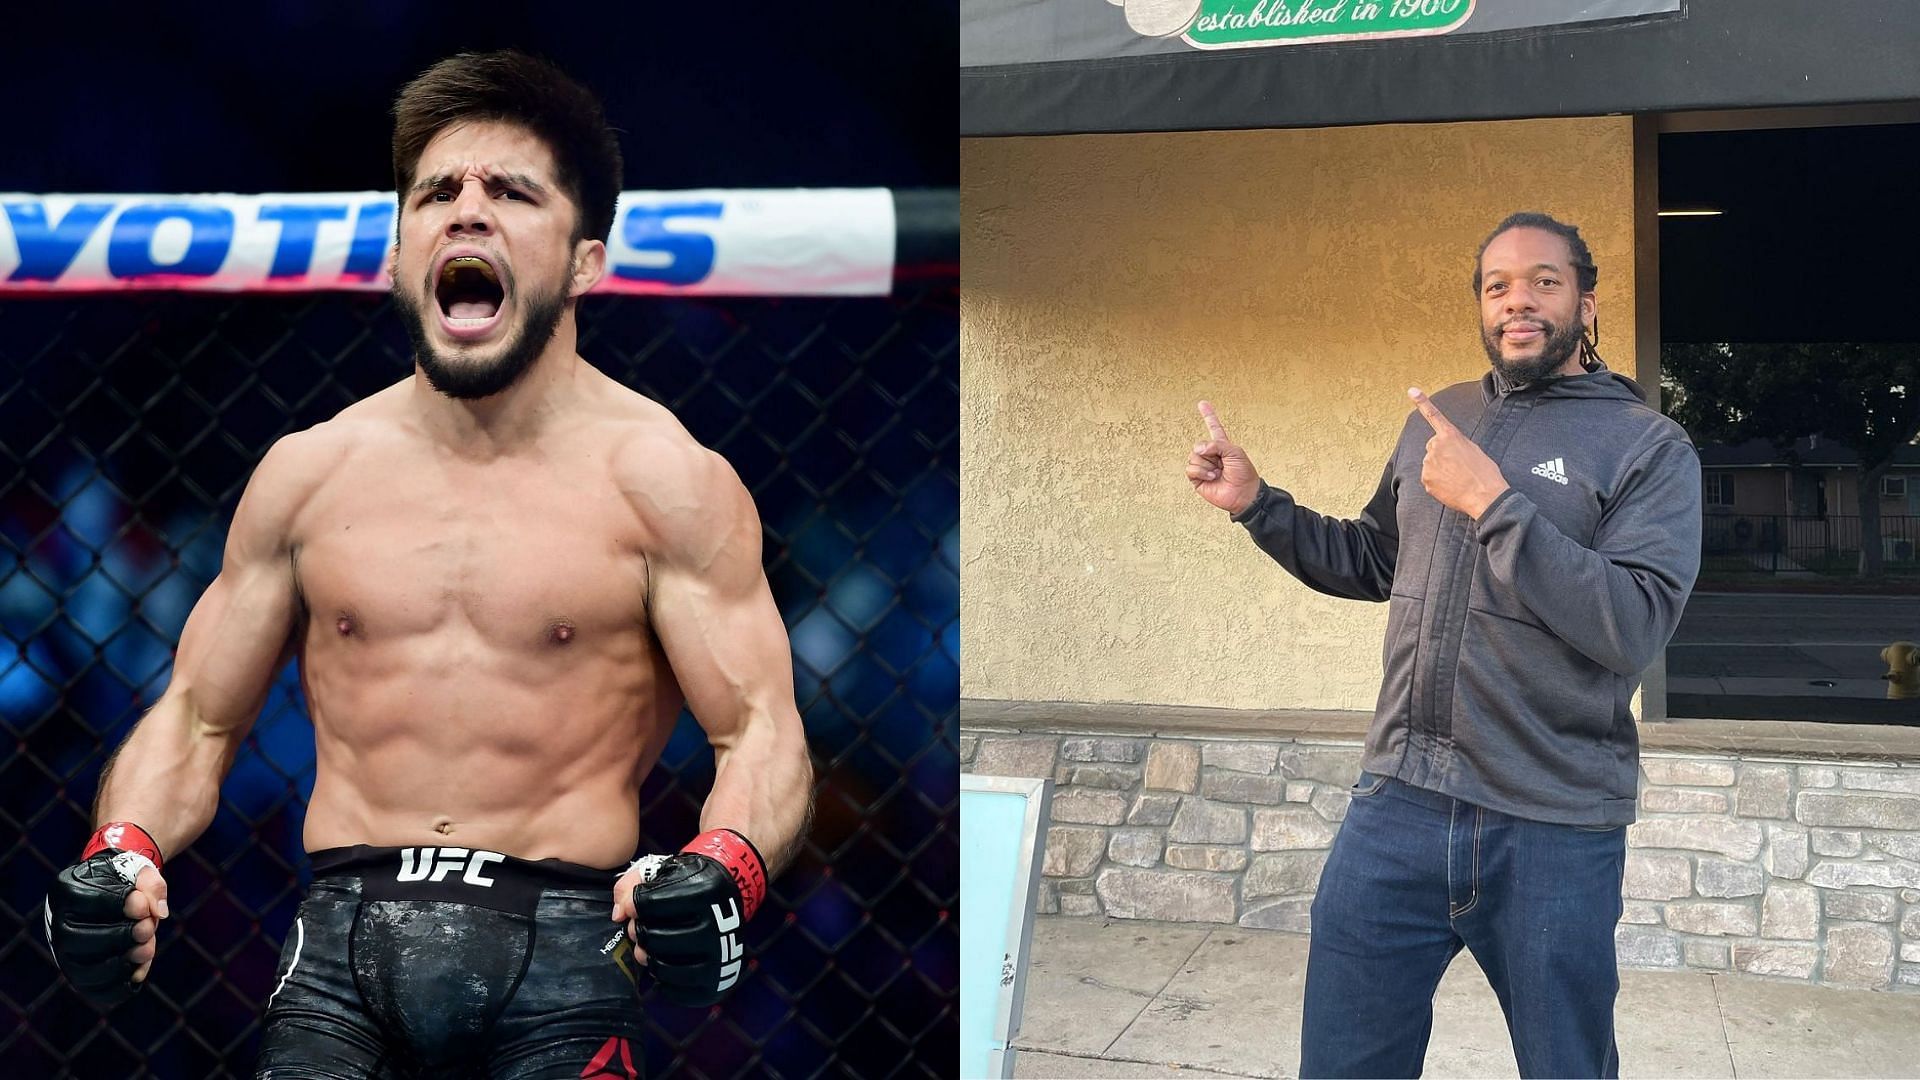 Henry Cejudo (Left) and Herb Dean (Right) (Images courtesy of Getty and @herbdeanmma Instagram)